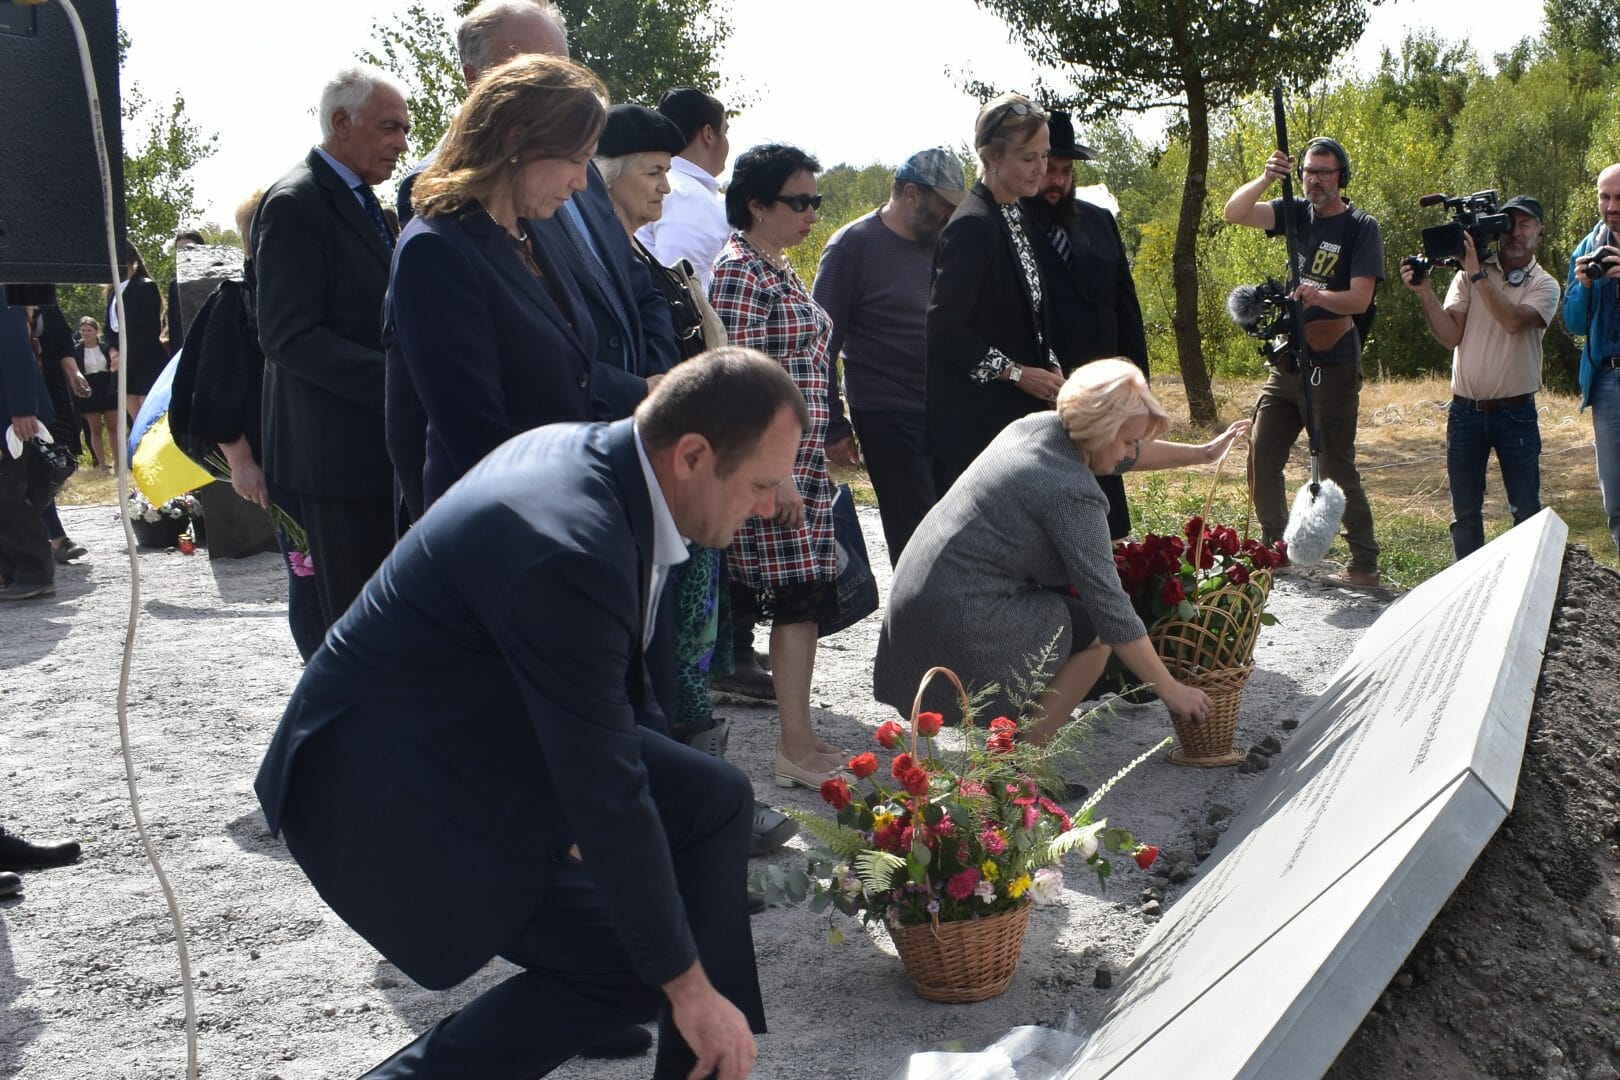 Opening of the Memorial to the Murdered Jews of Europe, September 2019